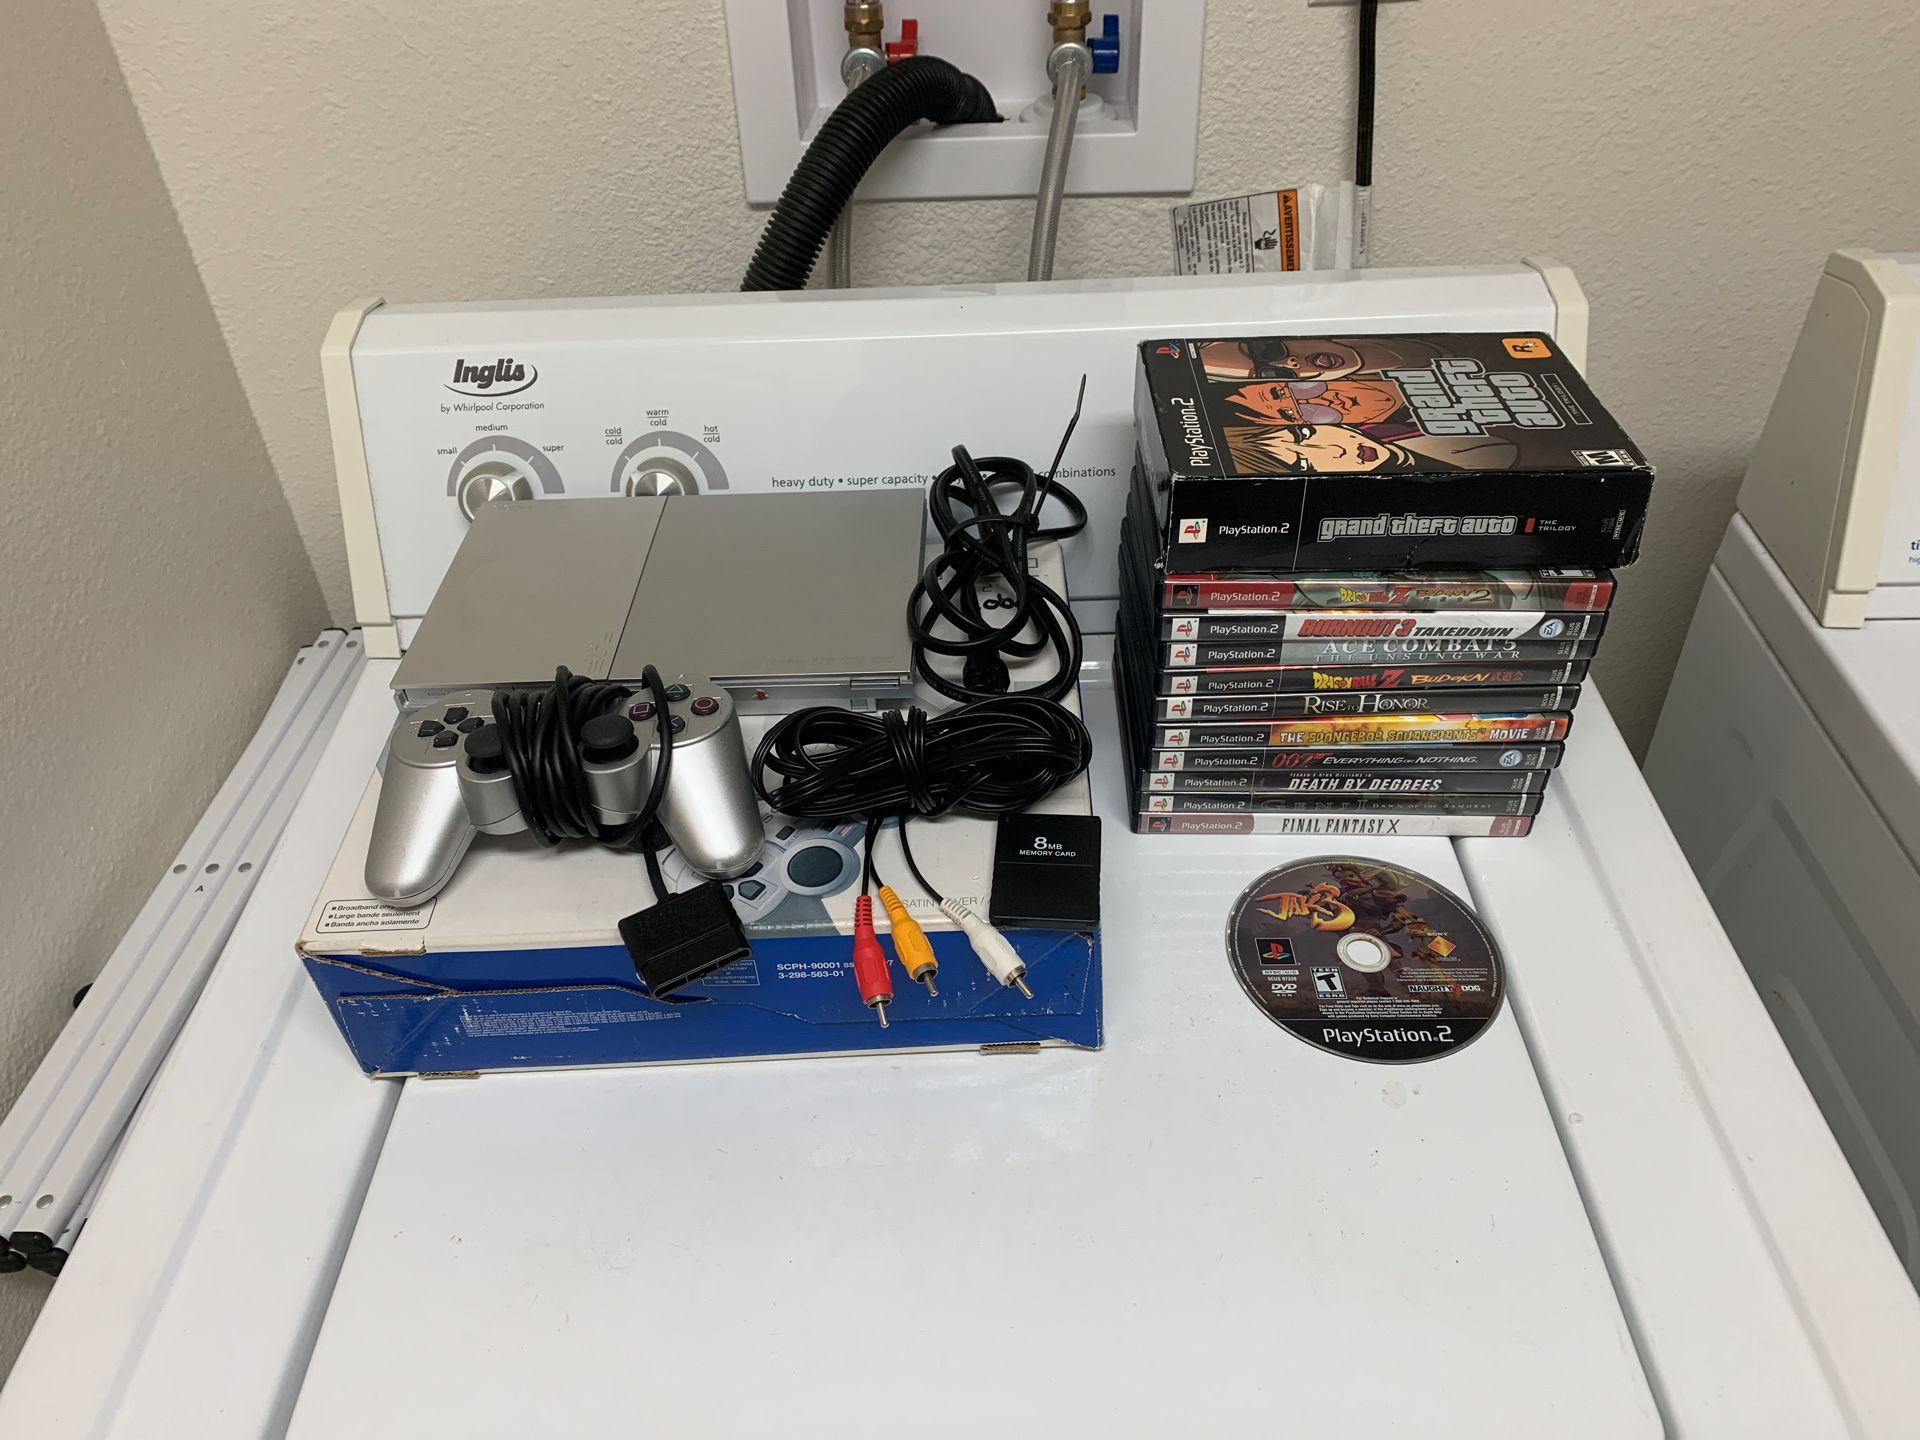 Ps2 game system including games